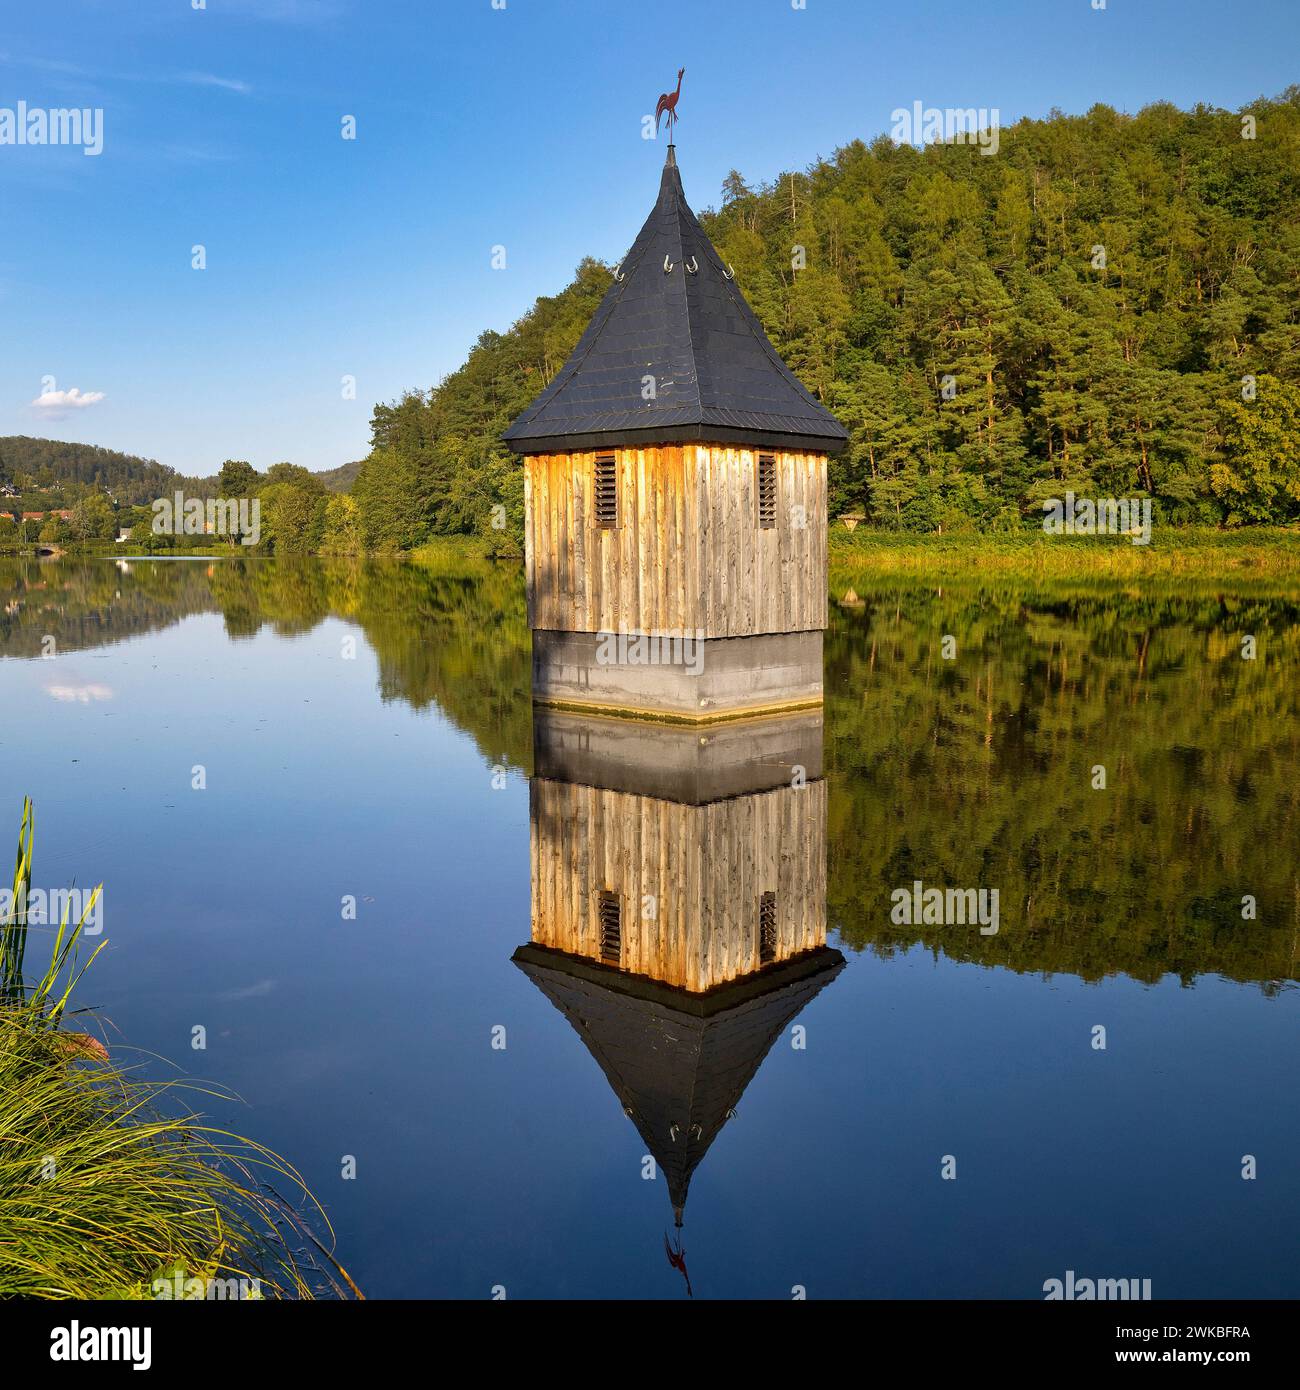 Church in the lake, church spire in the Reiherbach reservoir on Lake Edersee, reminiscent of the old village church of the village, Germany, Hesse, Ke Stock Photo